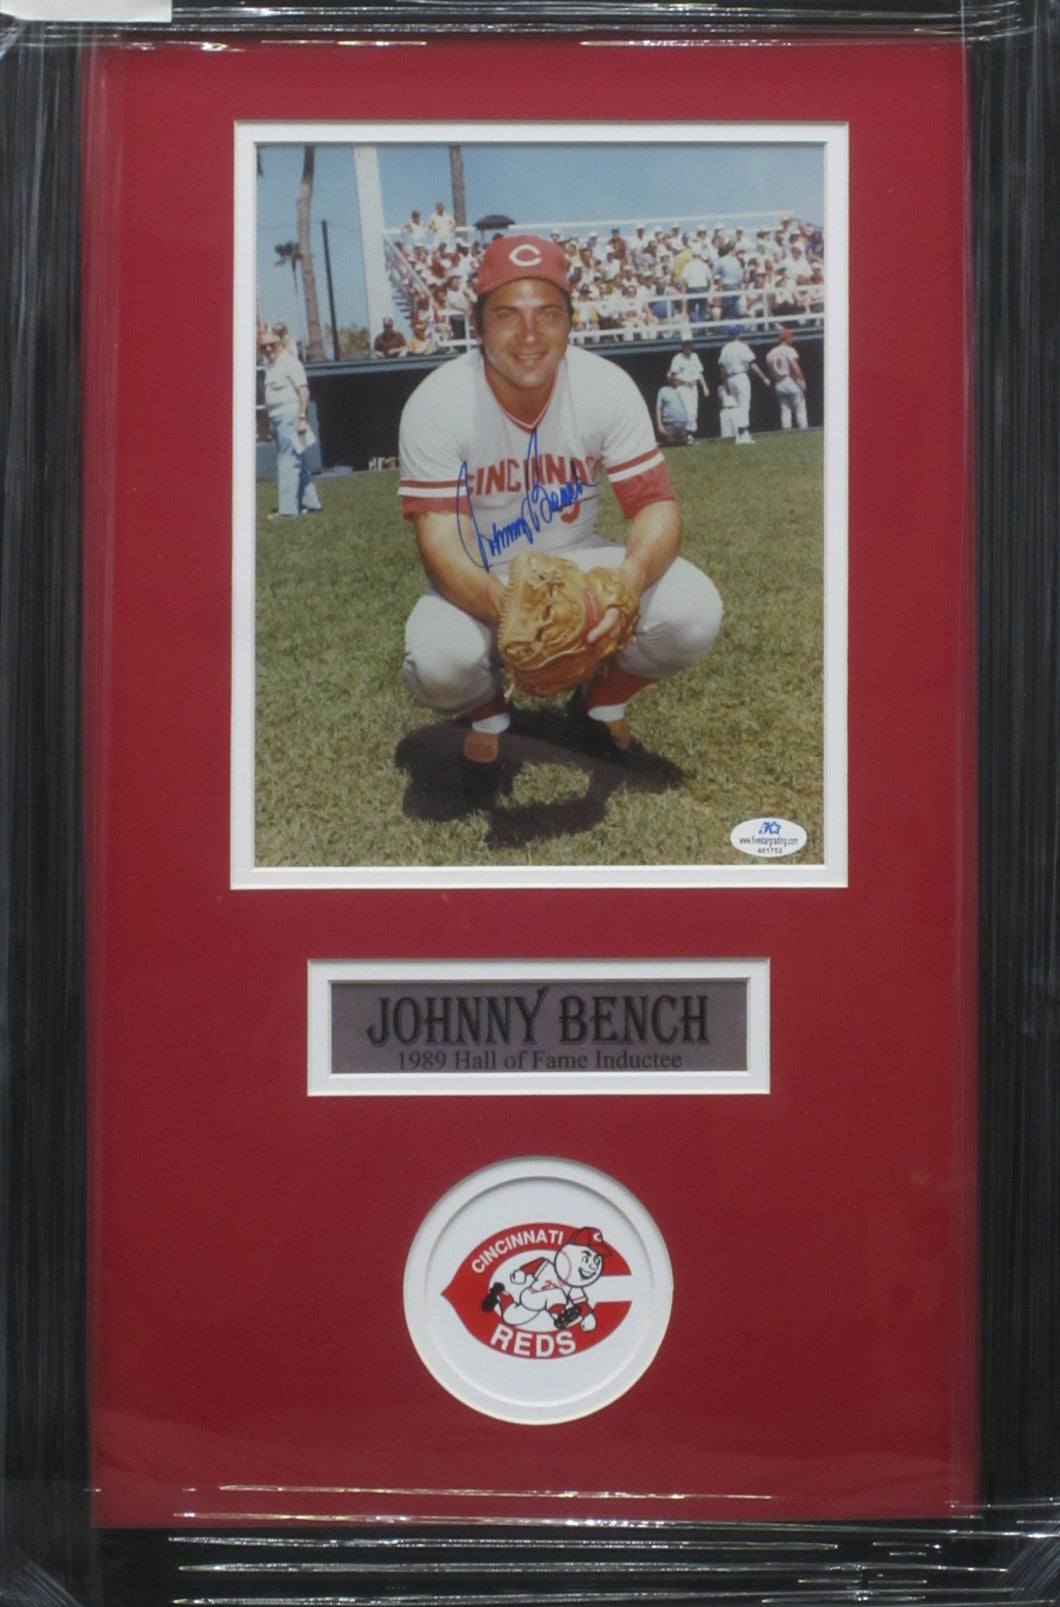 Cincinnati Reds Johnny Bench Signed 8x10 Photo Framed & Matted with COA